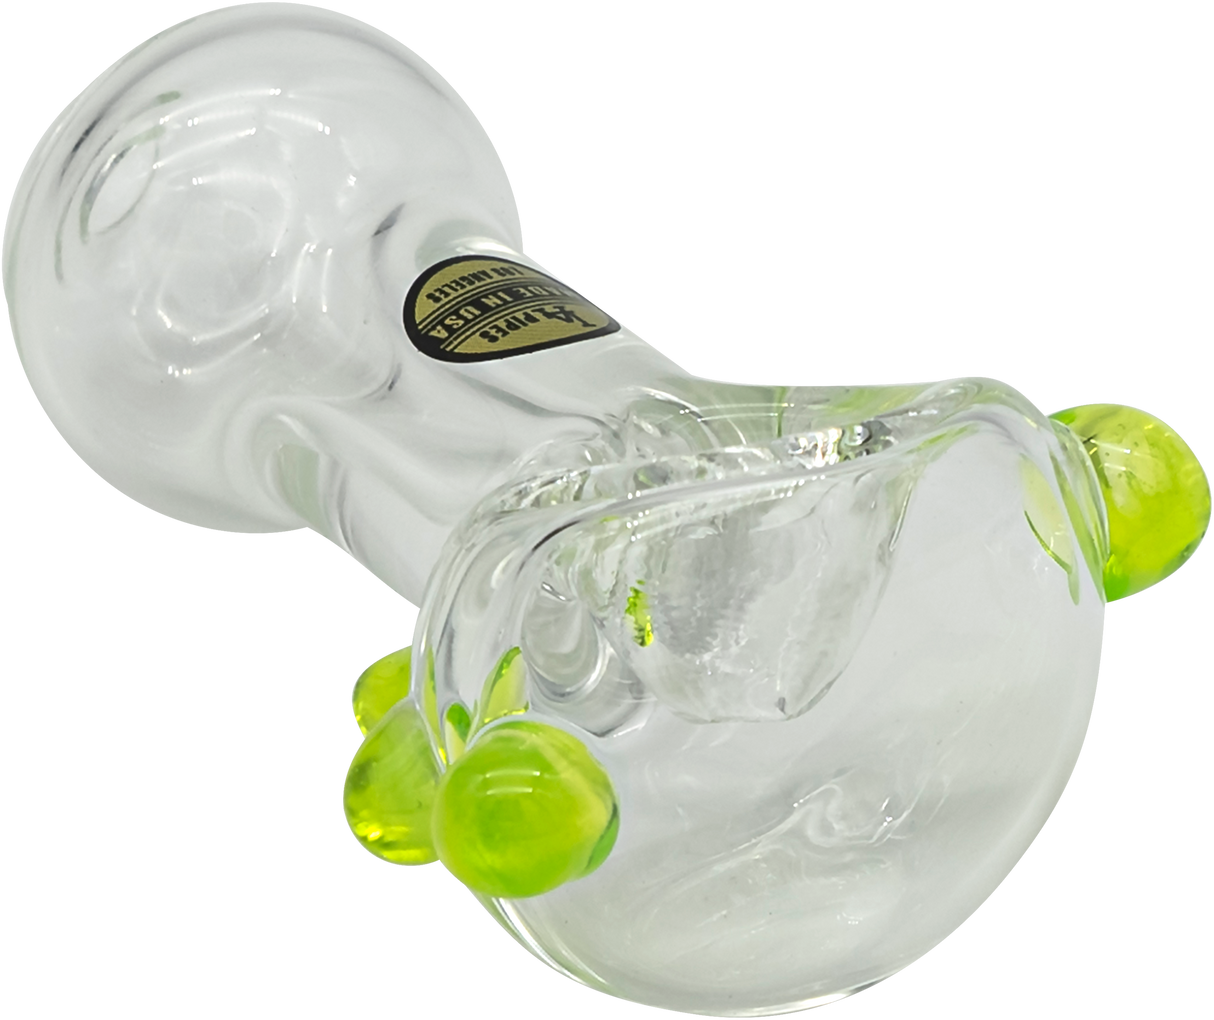 LA Pipes Thick Glass Spoon Pipe in Assorted Colors with Deep Bowl - Side View